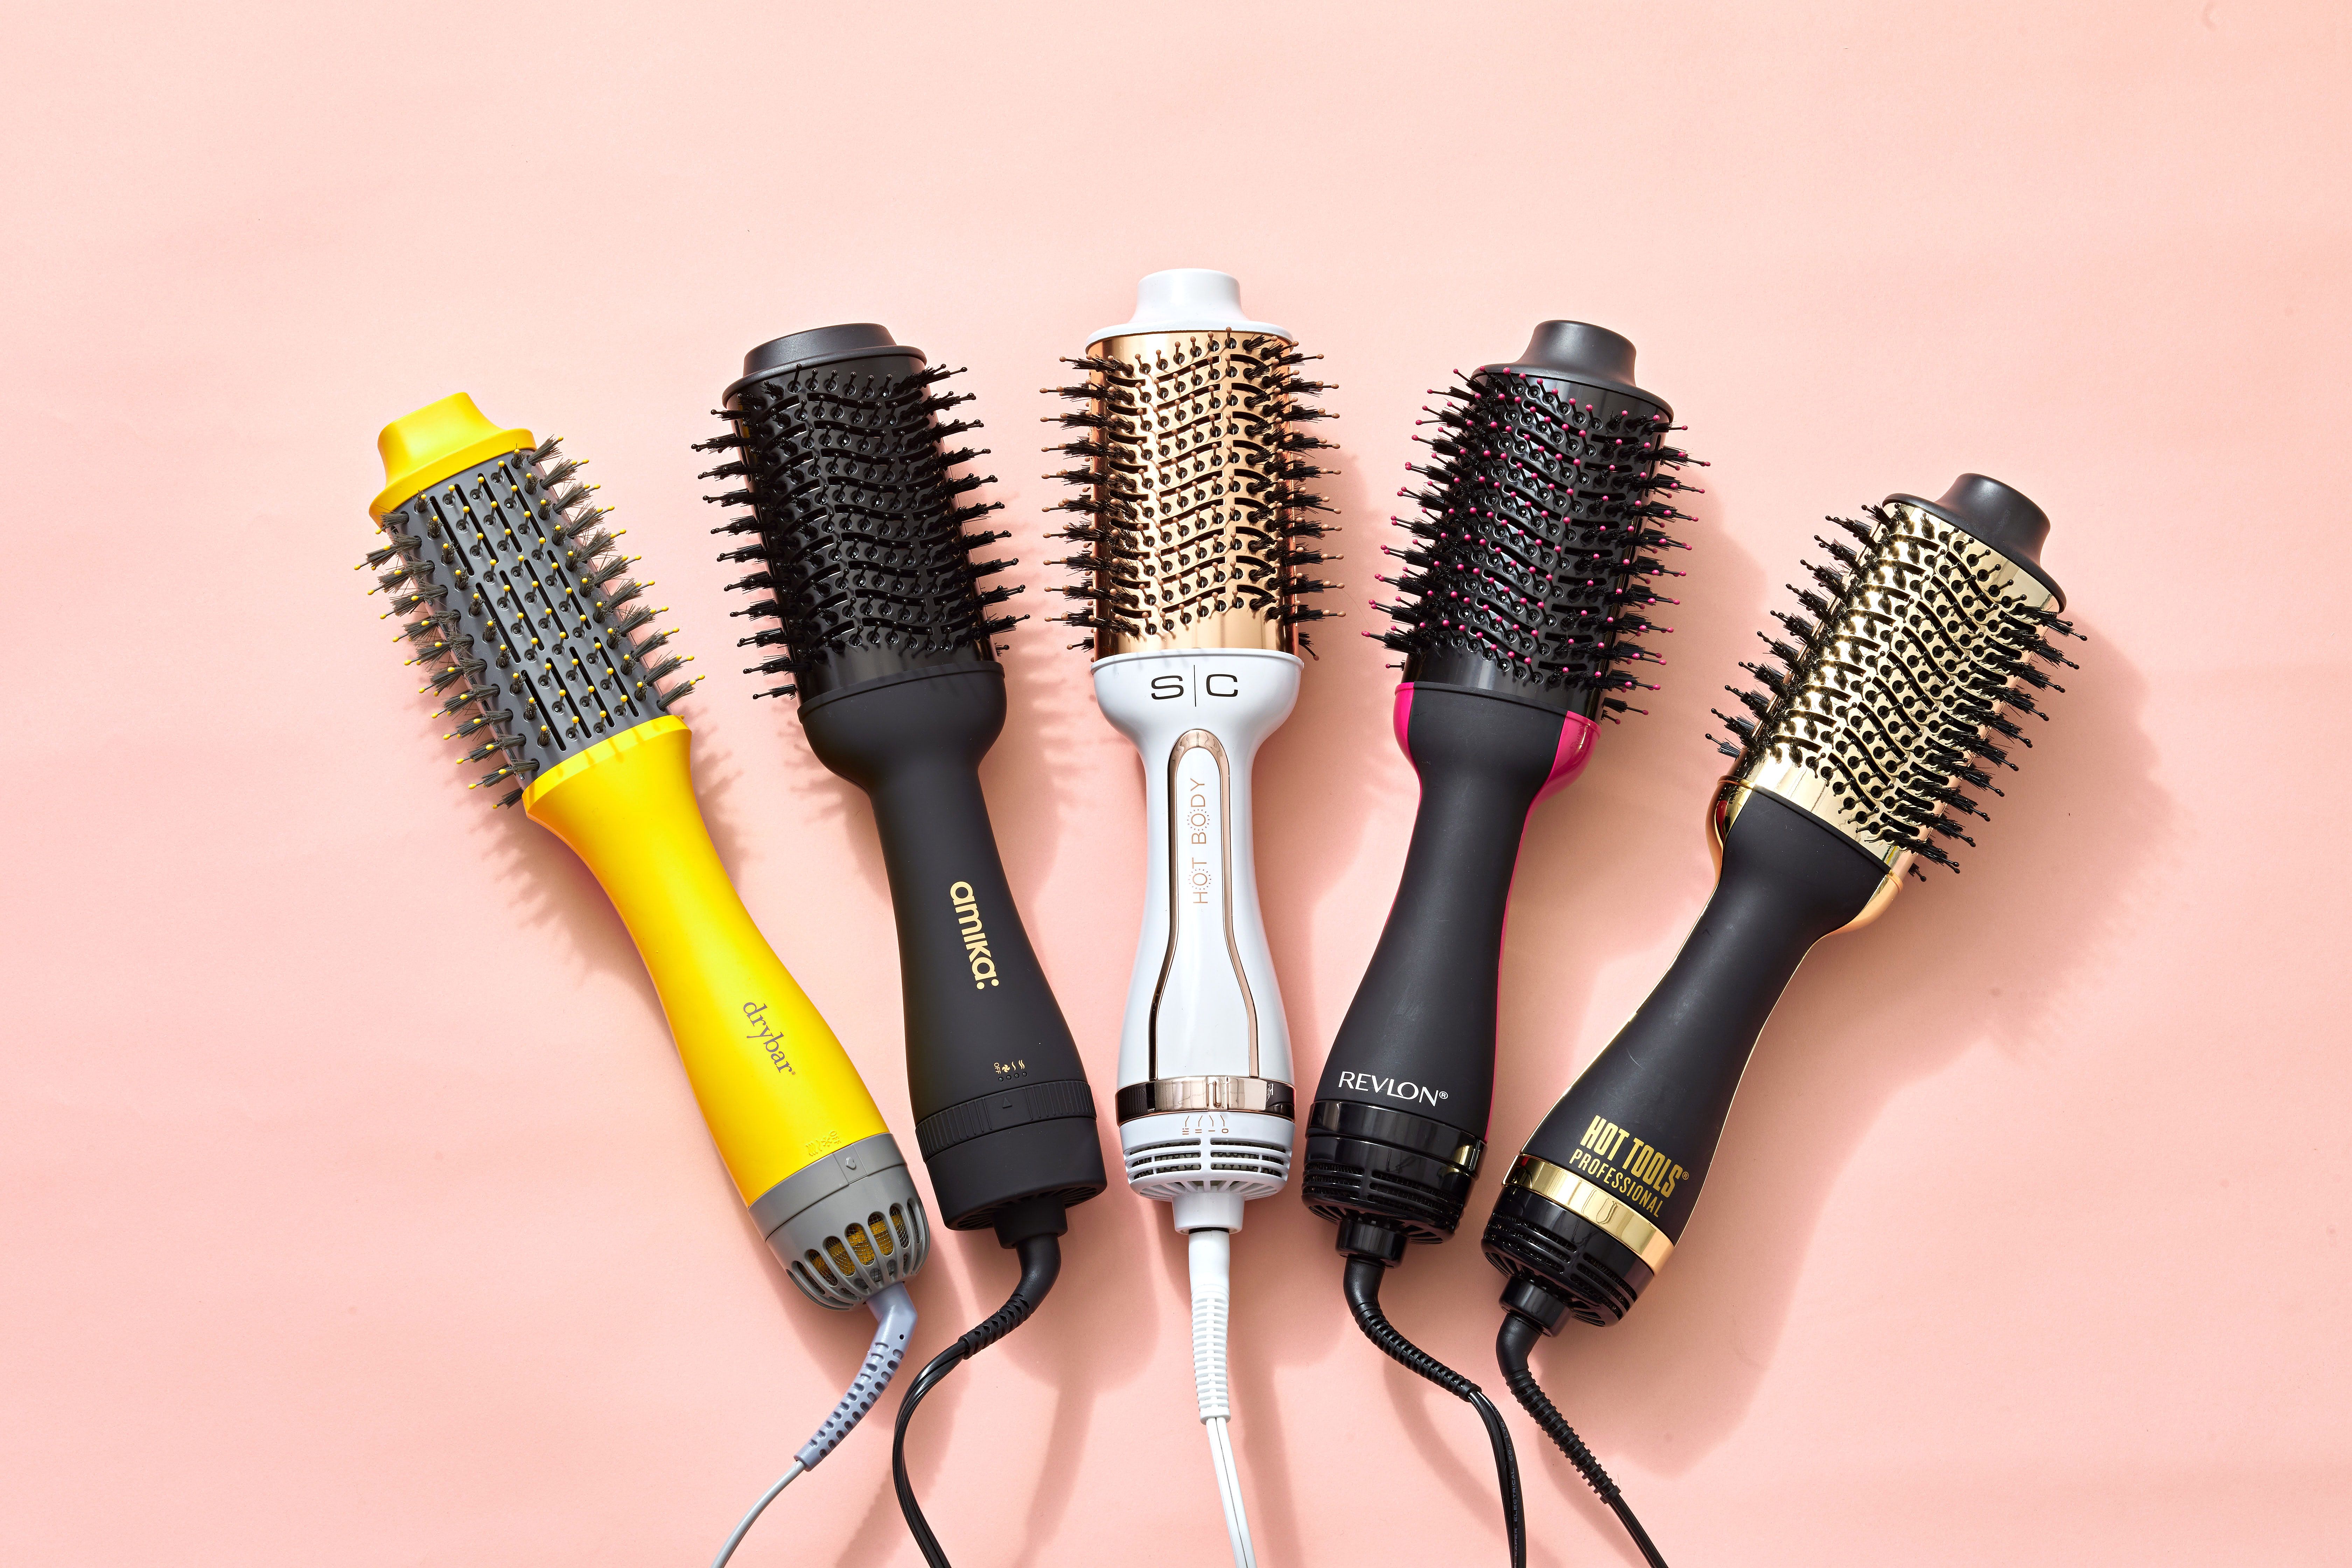 20 Best Hair Brushes For Every Hair Type Per Stylists And Reviews